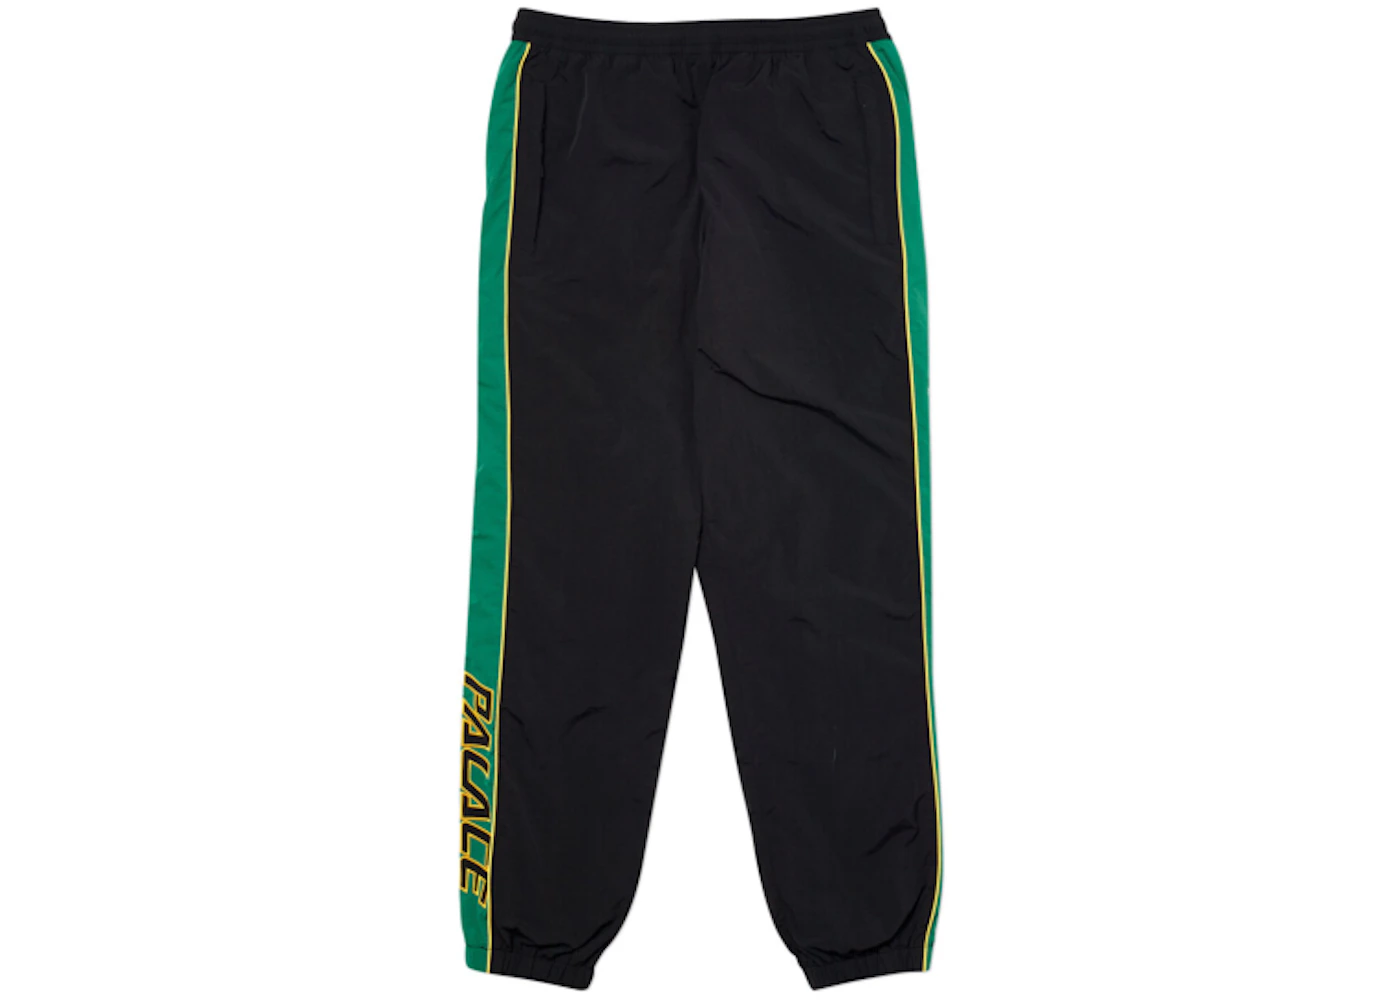 Palace Racer Shell Bottoms Yard Men's - FW19 - US